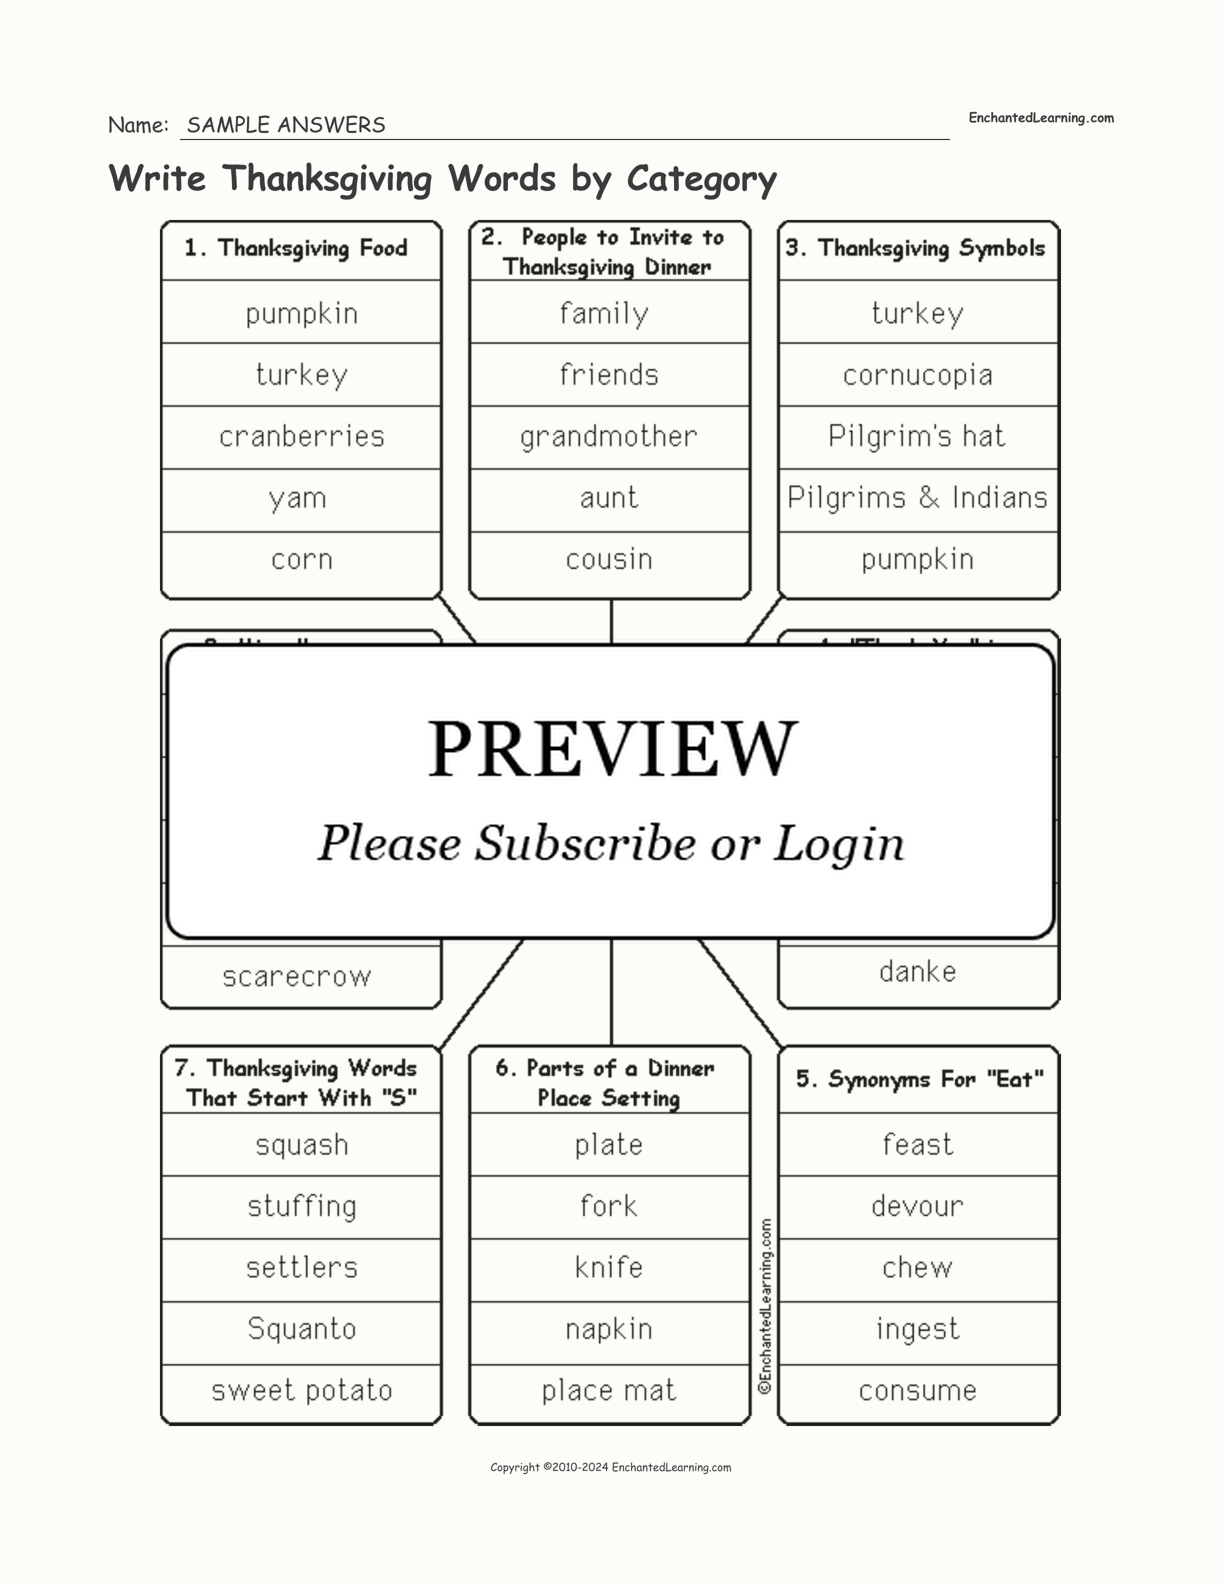 Write Thanksgiving Words by Category interactive worksheet page 2